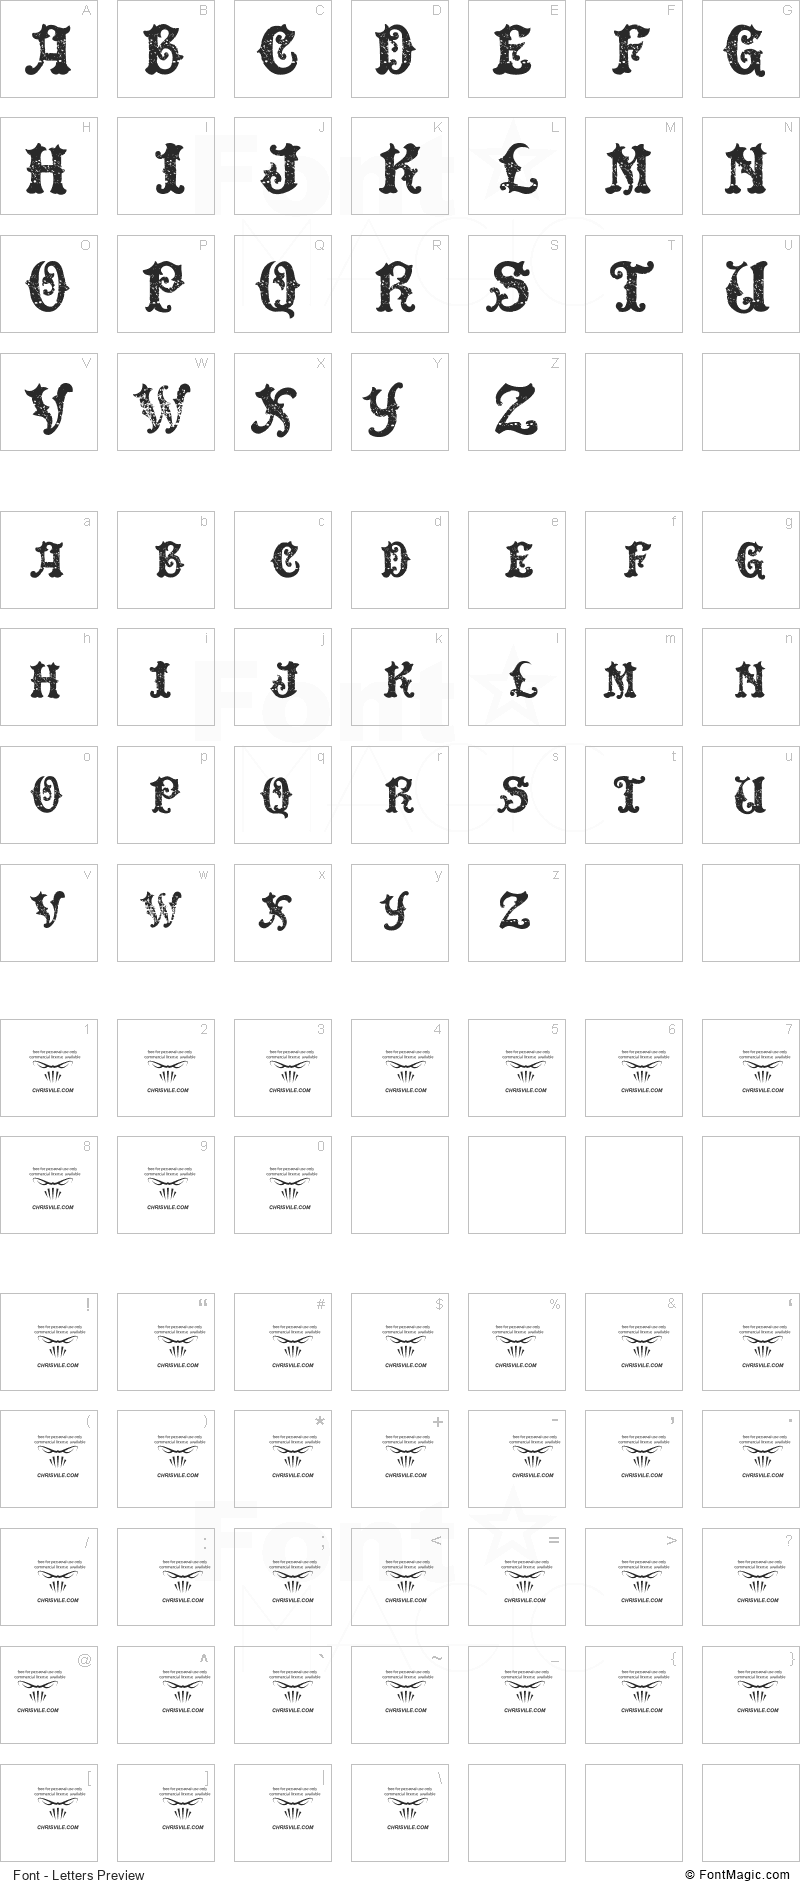 Dingle Huckleberry Font - All Latters Preview Chart